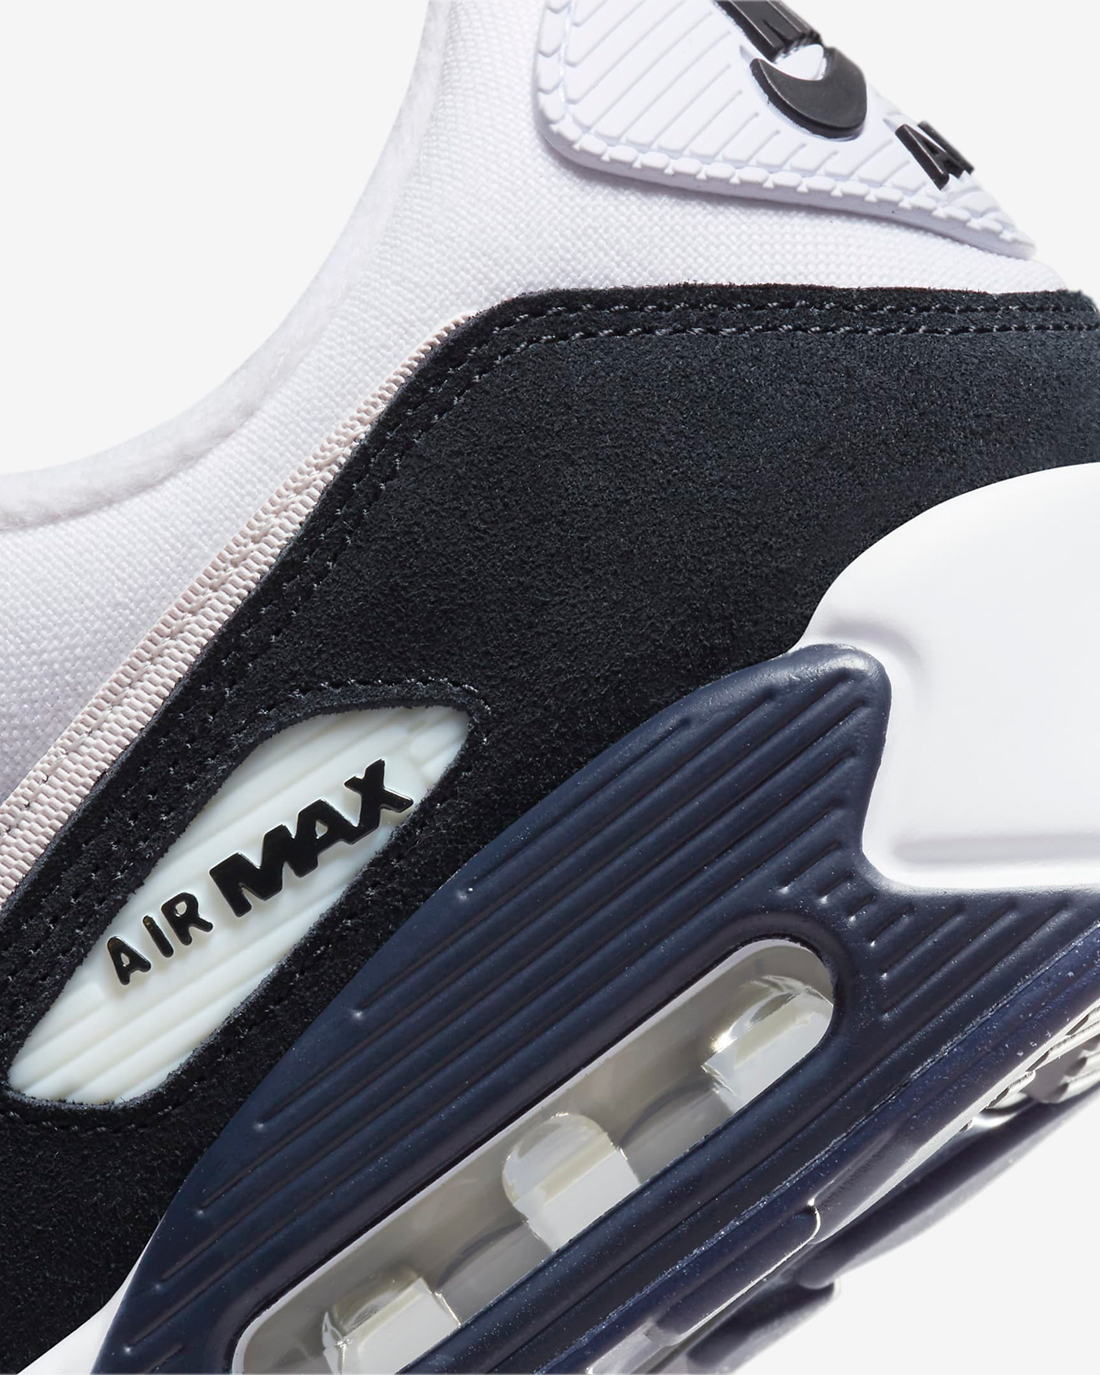 Nike-Air-Max-90-Flat-Pewter-Obsidian-Release-Date-Info-8